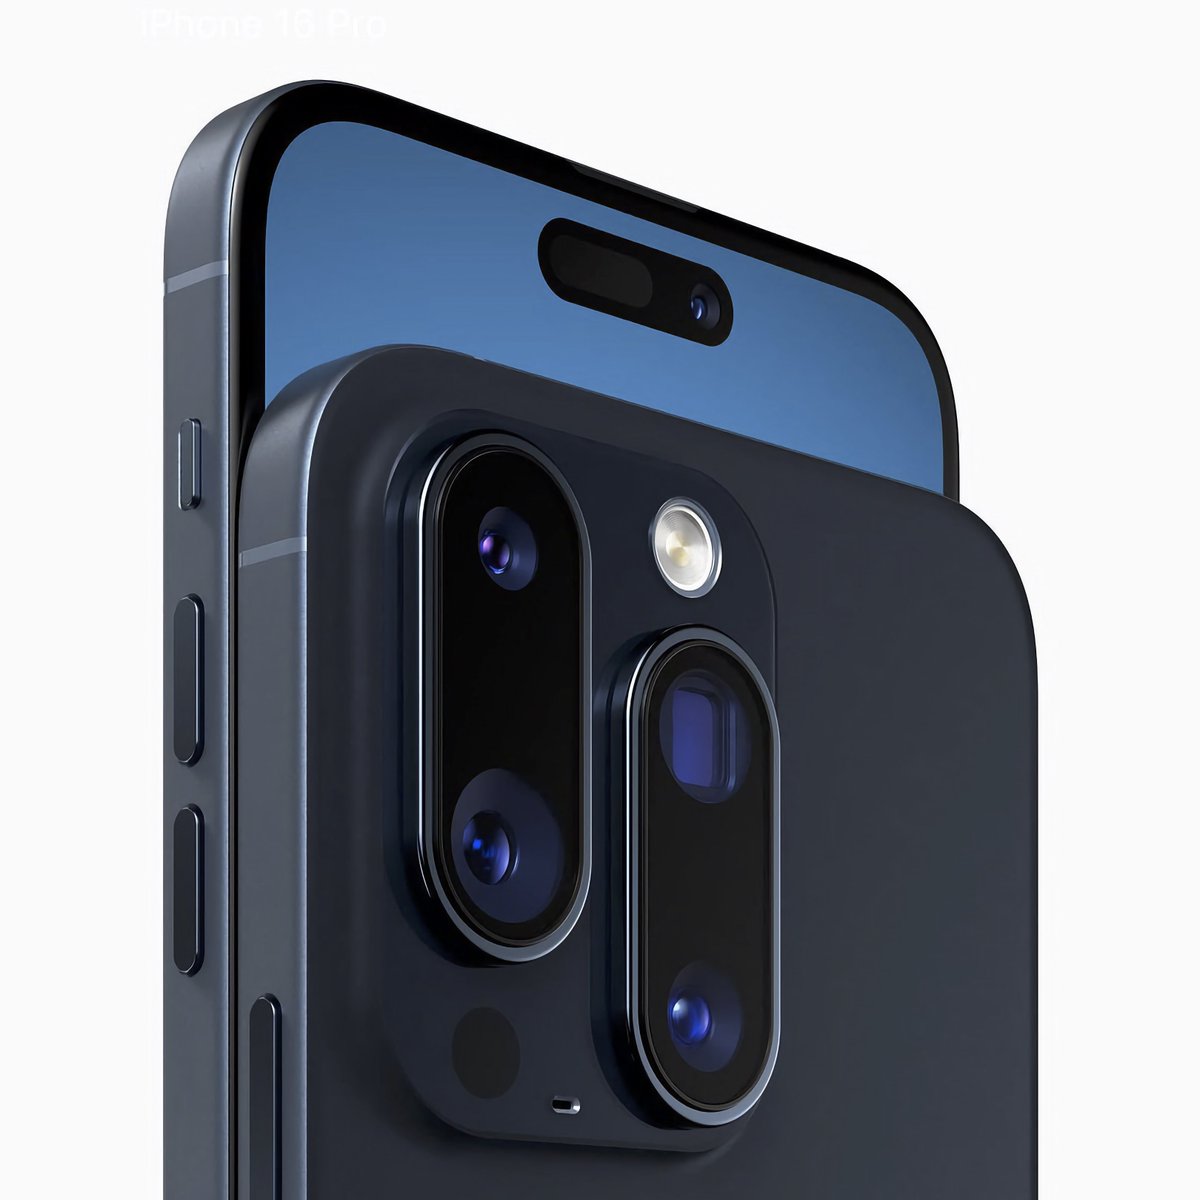 The iPhone 16 Pro Max is rumored to feature an ultra-telephoto periscope camera for increased zoom 📷

The main camera sensor will be 12% larger at 1/1.14-inches in size

Source: Digital Chat Station on Weibo